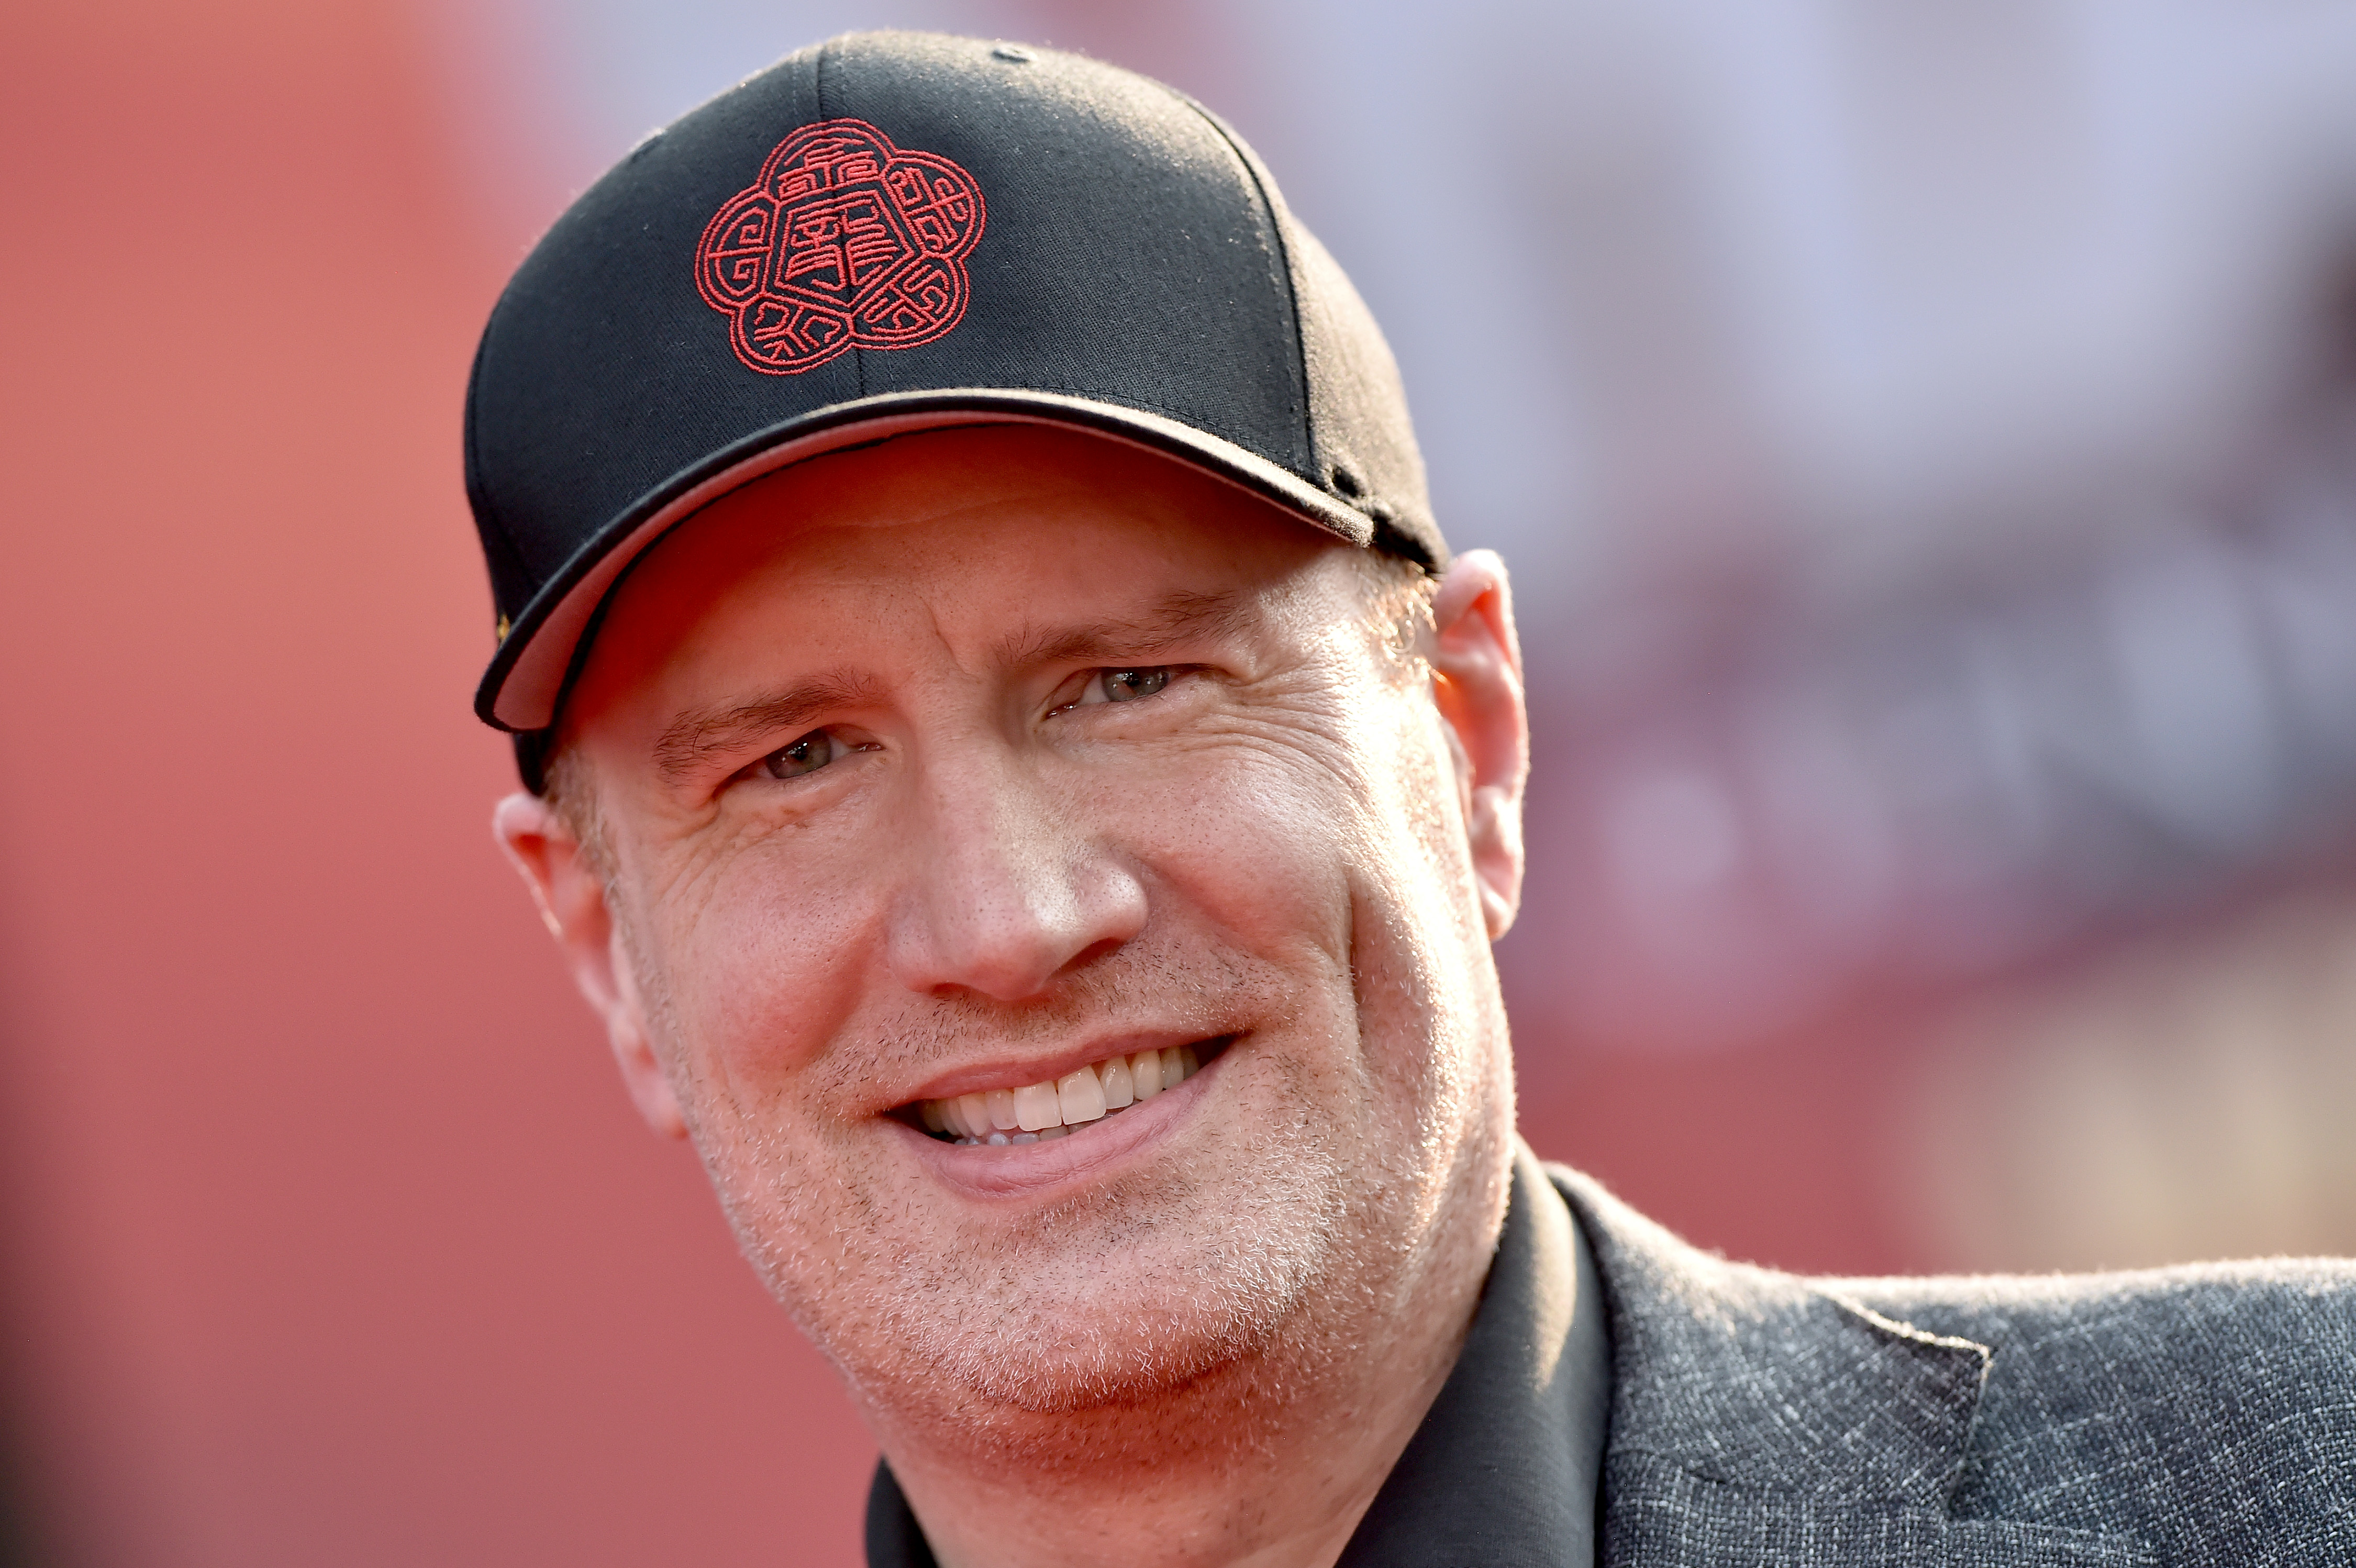 LOS ANGELES, CALIFORNIA - AUGUST 16: Kevin Feige attends Disney's Premiere of "Shang-Chi and the Legend of the Ten Rings" at El Capitan Theatre on August 16, 2021 in Los Angeles, California.